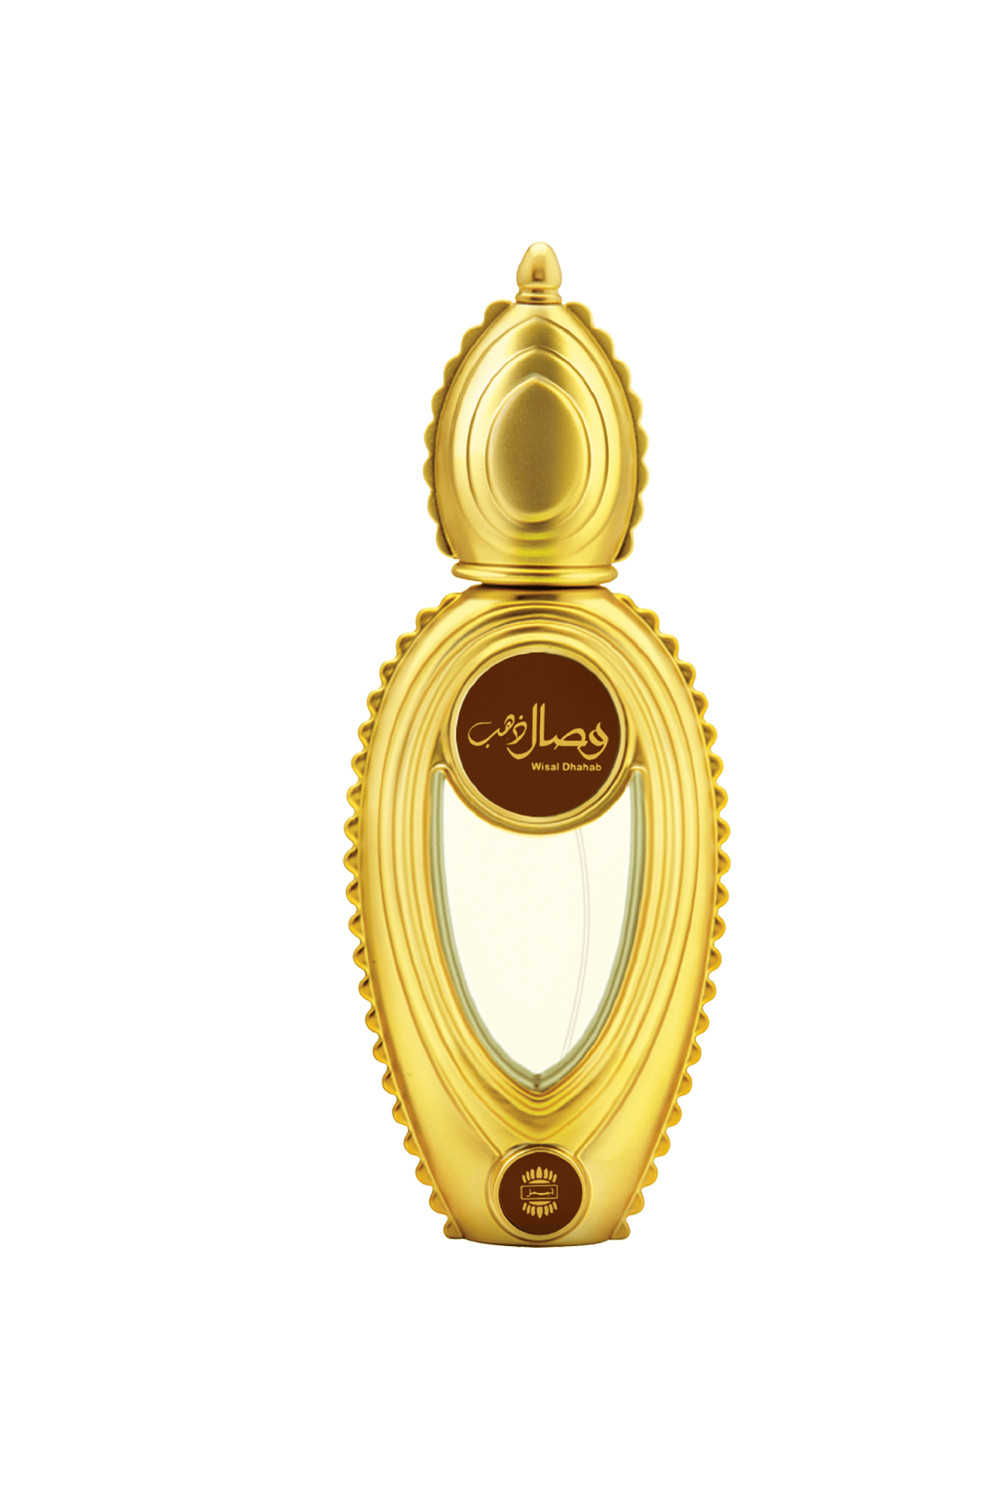 Ajmal | Ajmal Wisal Dhahab EDP Fruity Floral Perfume 50ml for Men and Aura Concentrated Perfume Oil Floral Fruity Alcohol-free Attar 10ml for Unisex + 2 Parfum Testers FREE